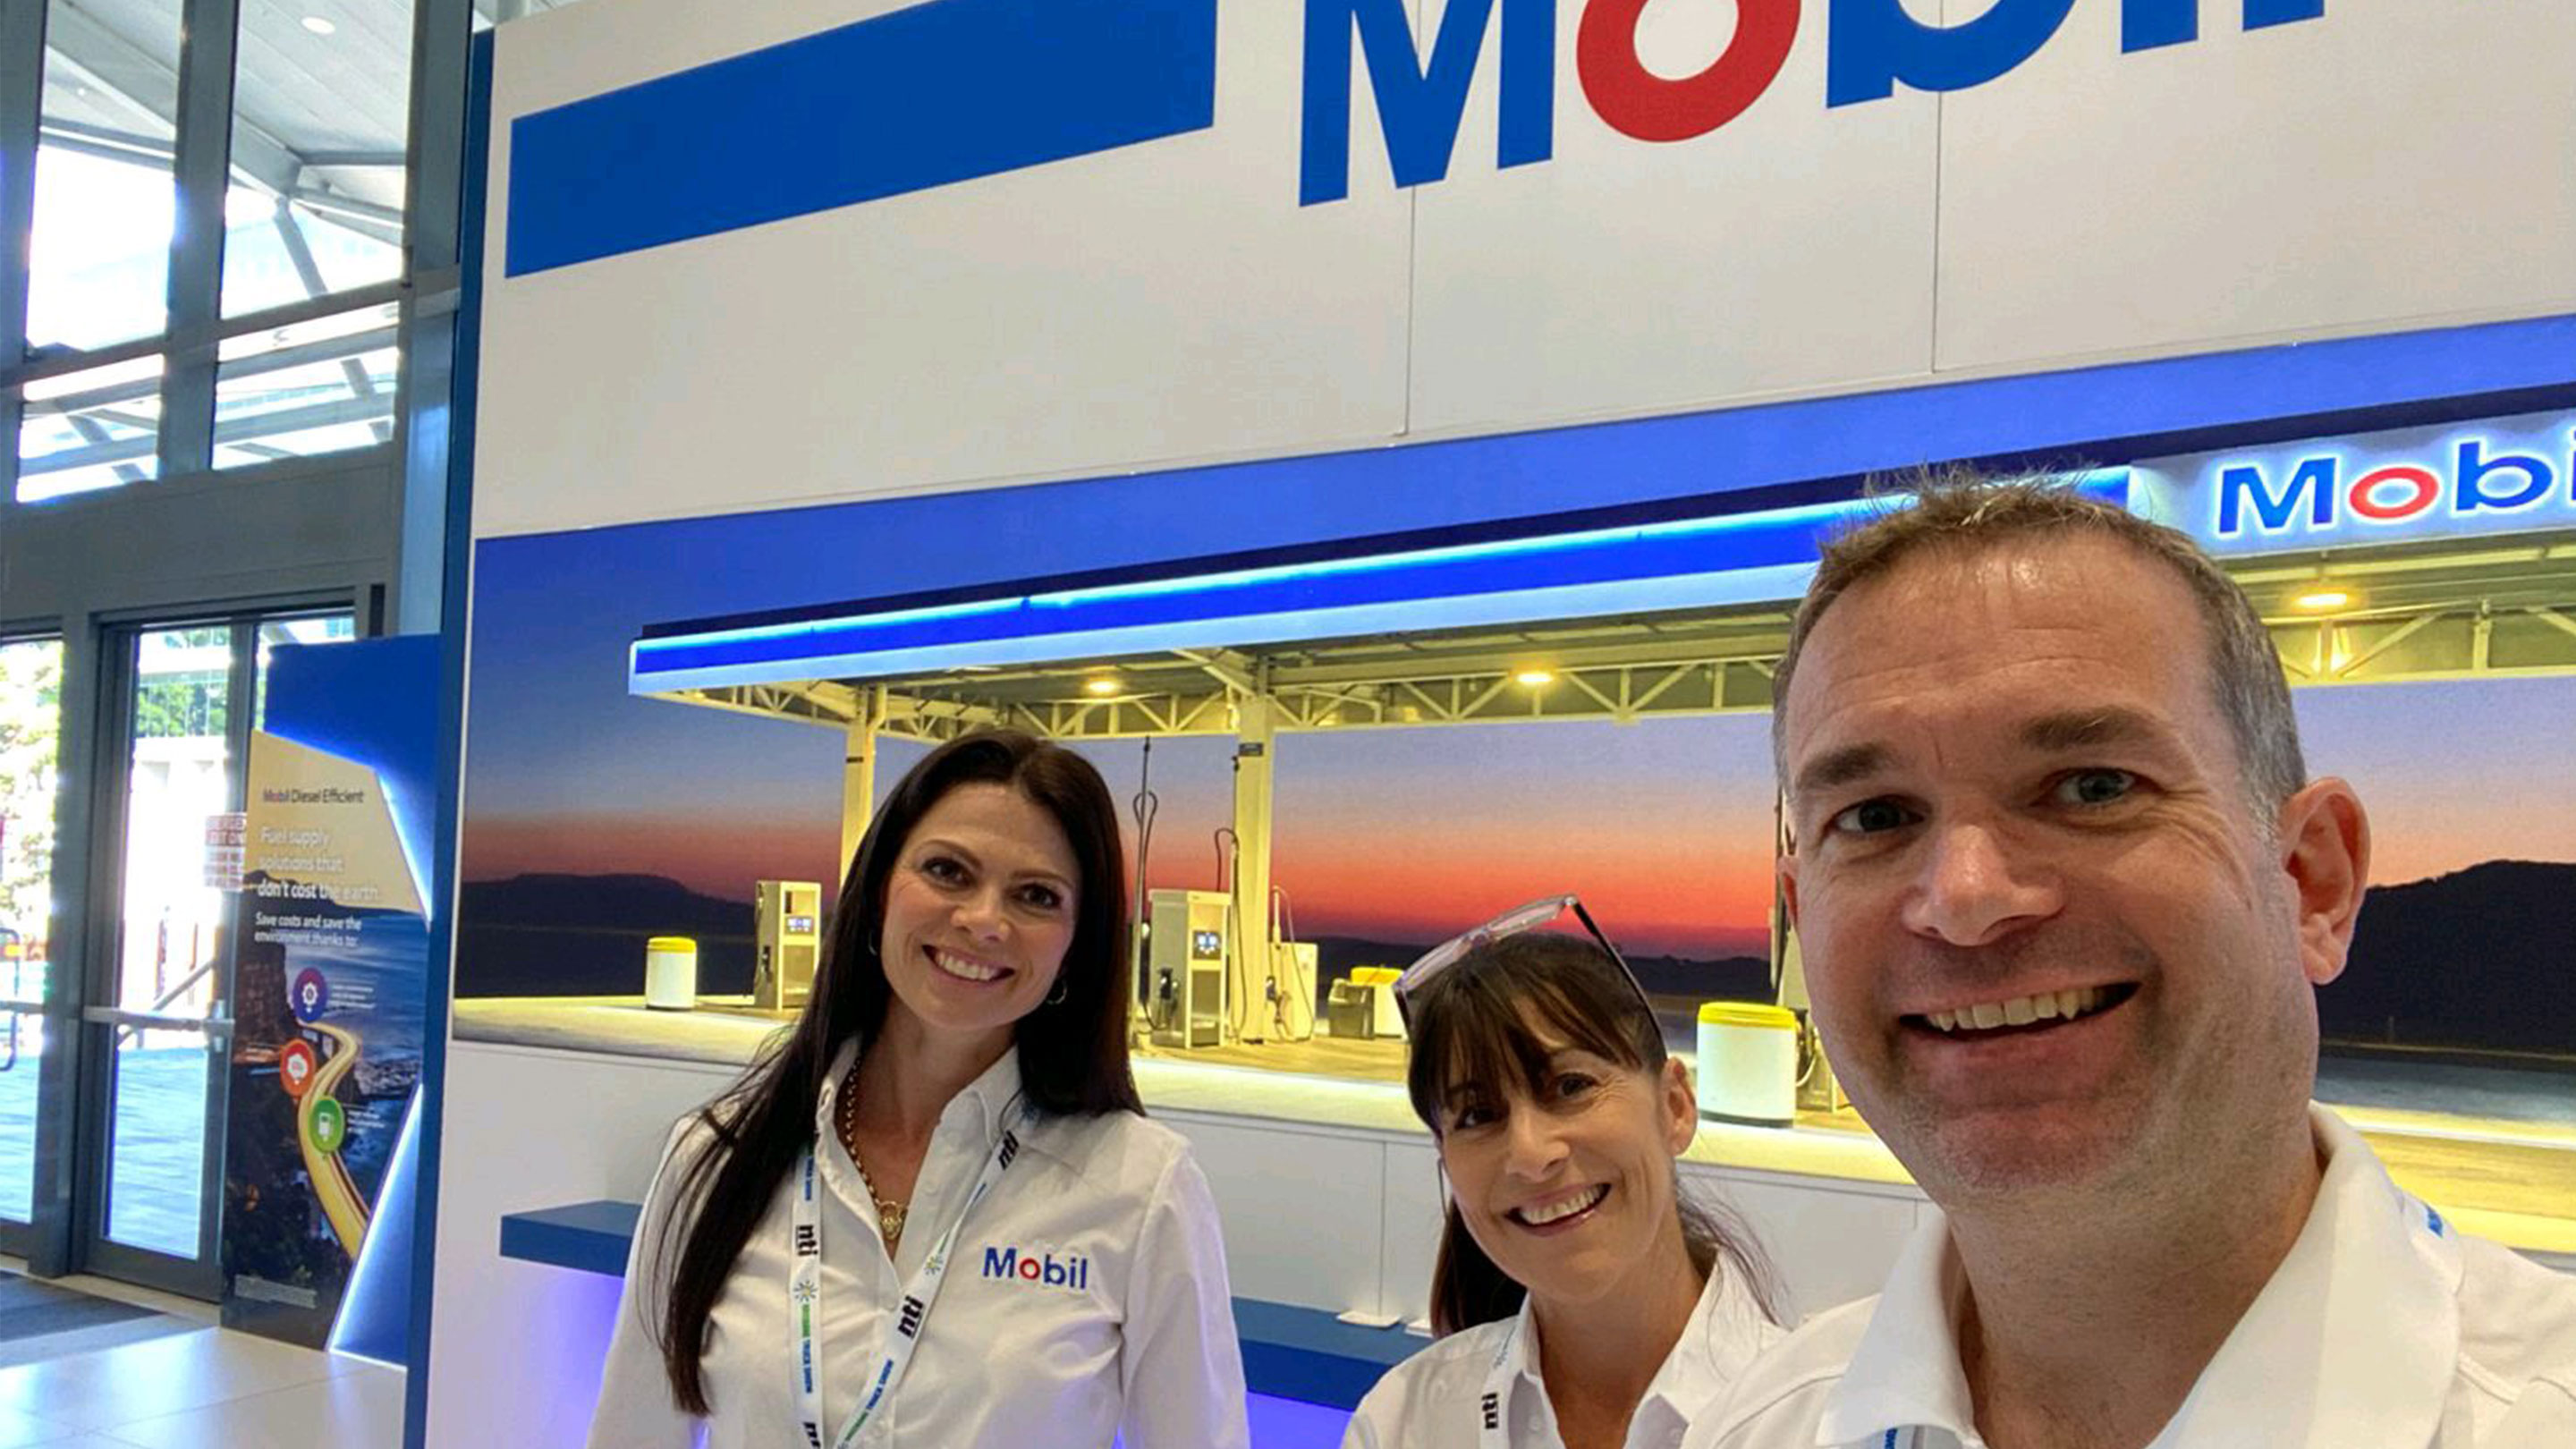 Image Members of the Mobil Australia fuels team recently participated in the Brisbane Truck Show to promote the growing Mobil network, as well as the benefits of Mobil Diesel Efficient and Mobil Card to a key customer community.